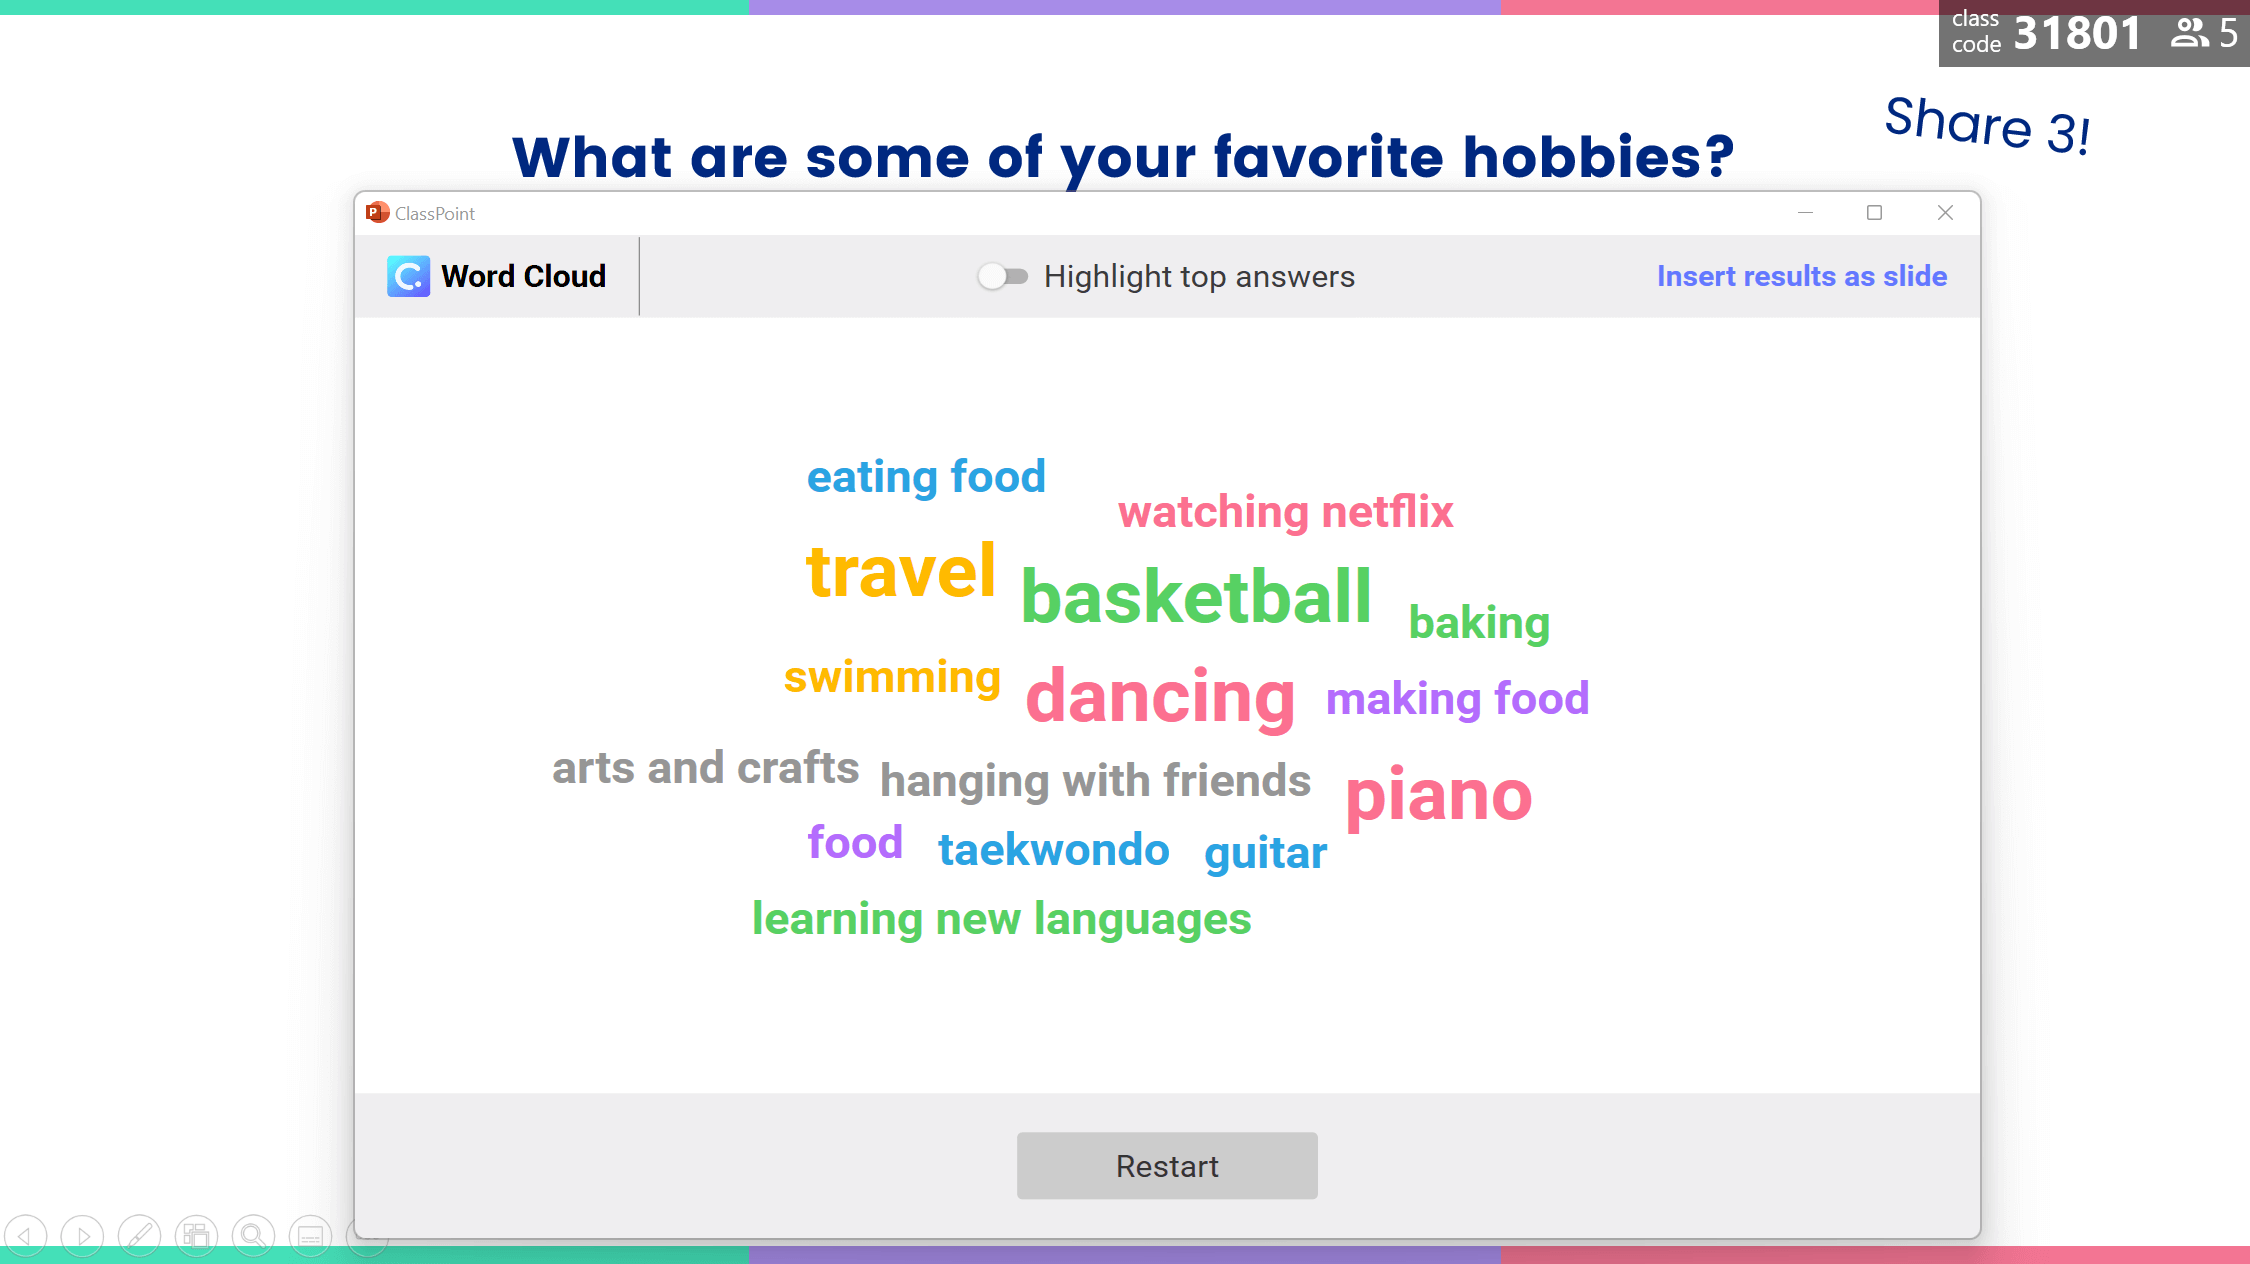 Word Cloud activities: What are your favorite hobbies?